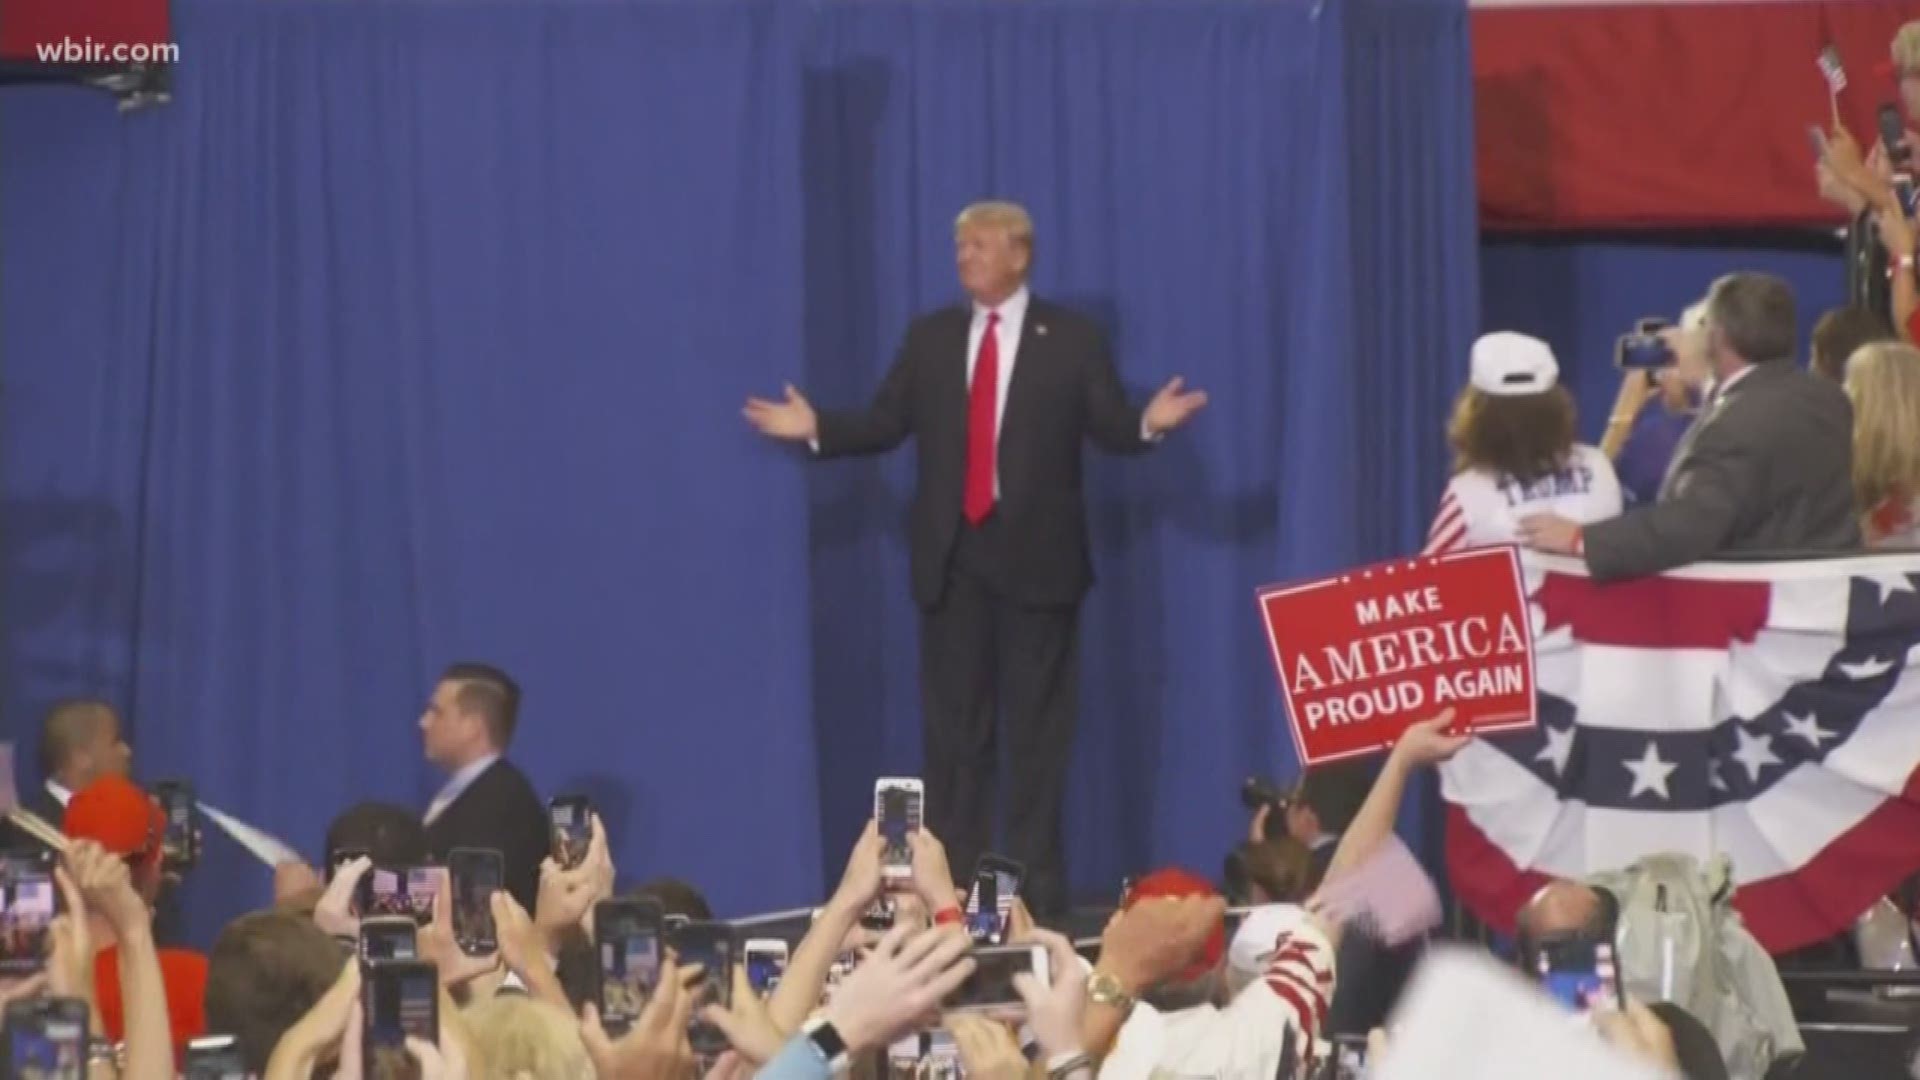 A 'Make America Great Again' rally is planned in Johnson City. The same day the president is scheduled to arrive and campaign for Republican senate candidate Marsha Blackburn.